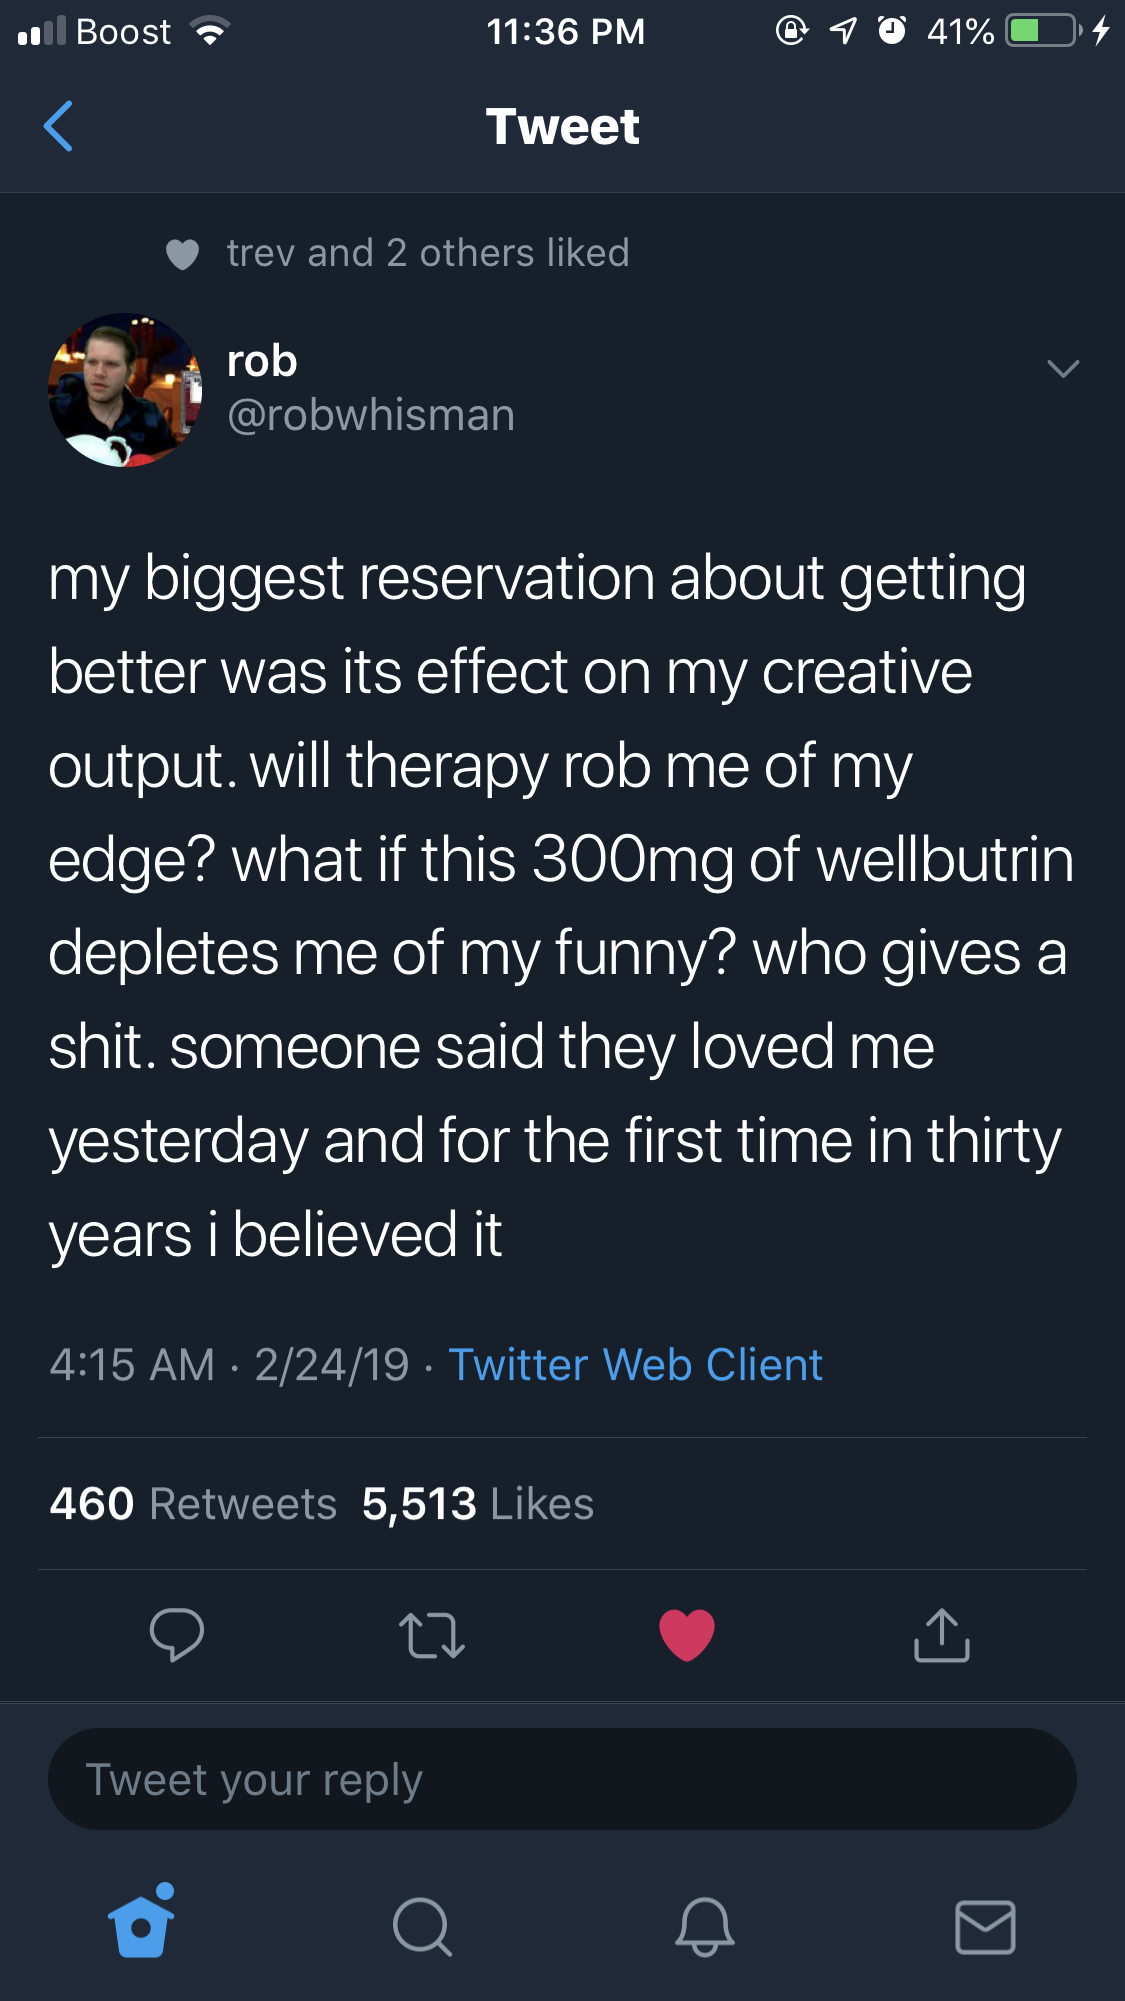 screenshot - Boost 41% Tweet trev and 2 others d rob my biggest reservation about getting better was its effect on my creative output. will therapy rob me of my edge? what if this 300mg of wellbutrin depletes me of my funny? who gives a shit. someone said